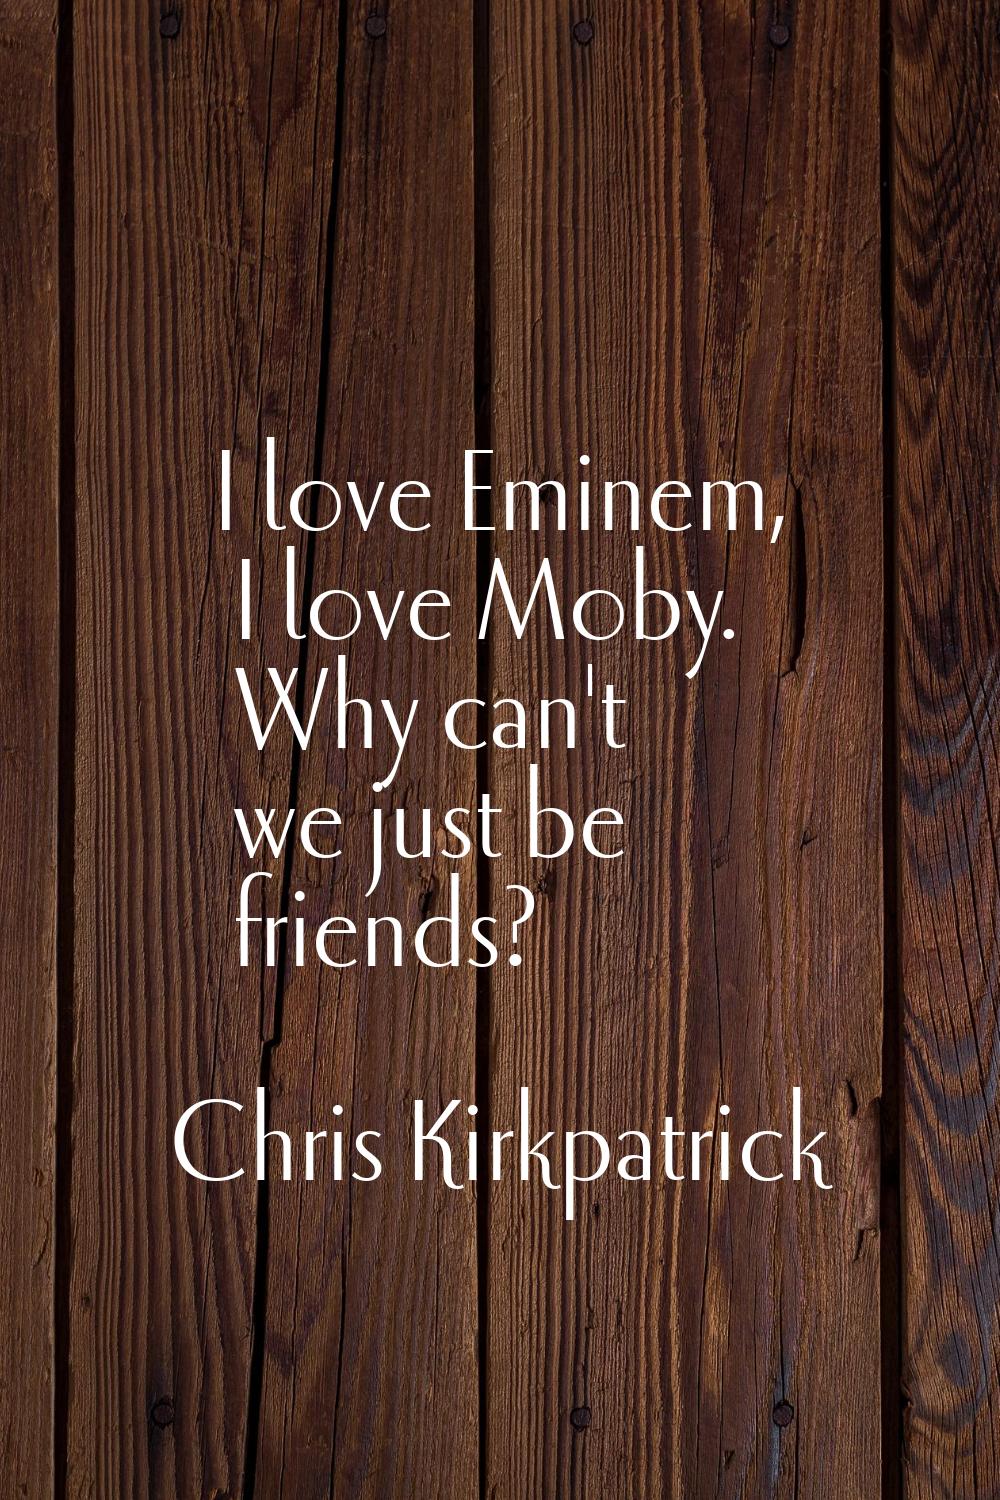 I love Eminem, I love Moby. Why can't we just be friends?